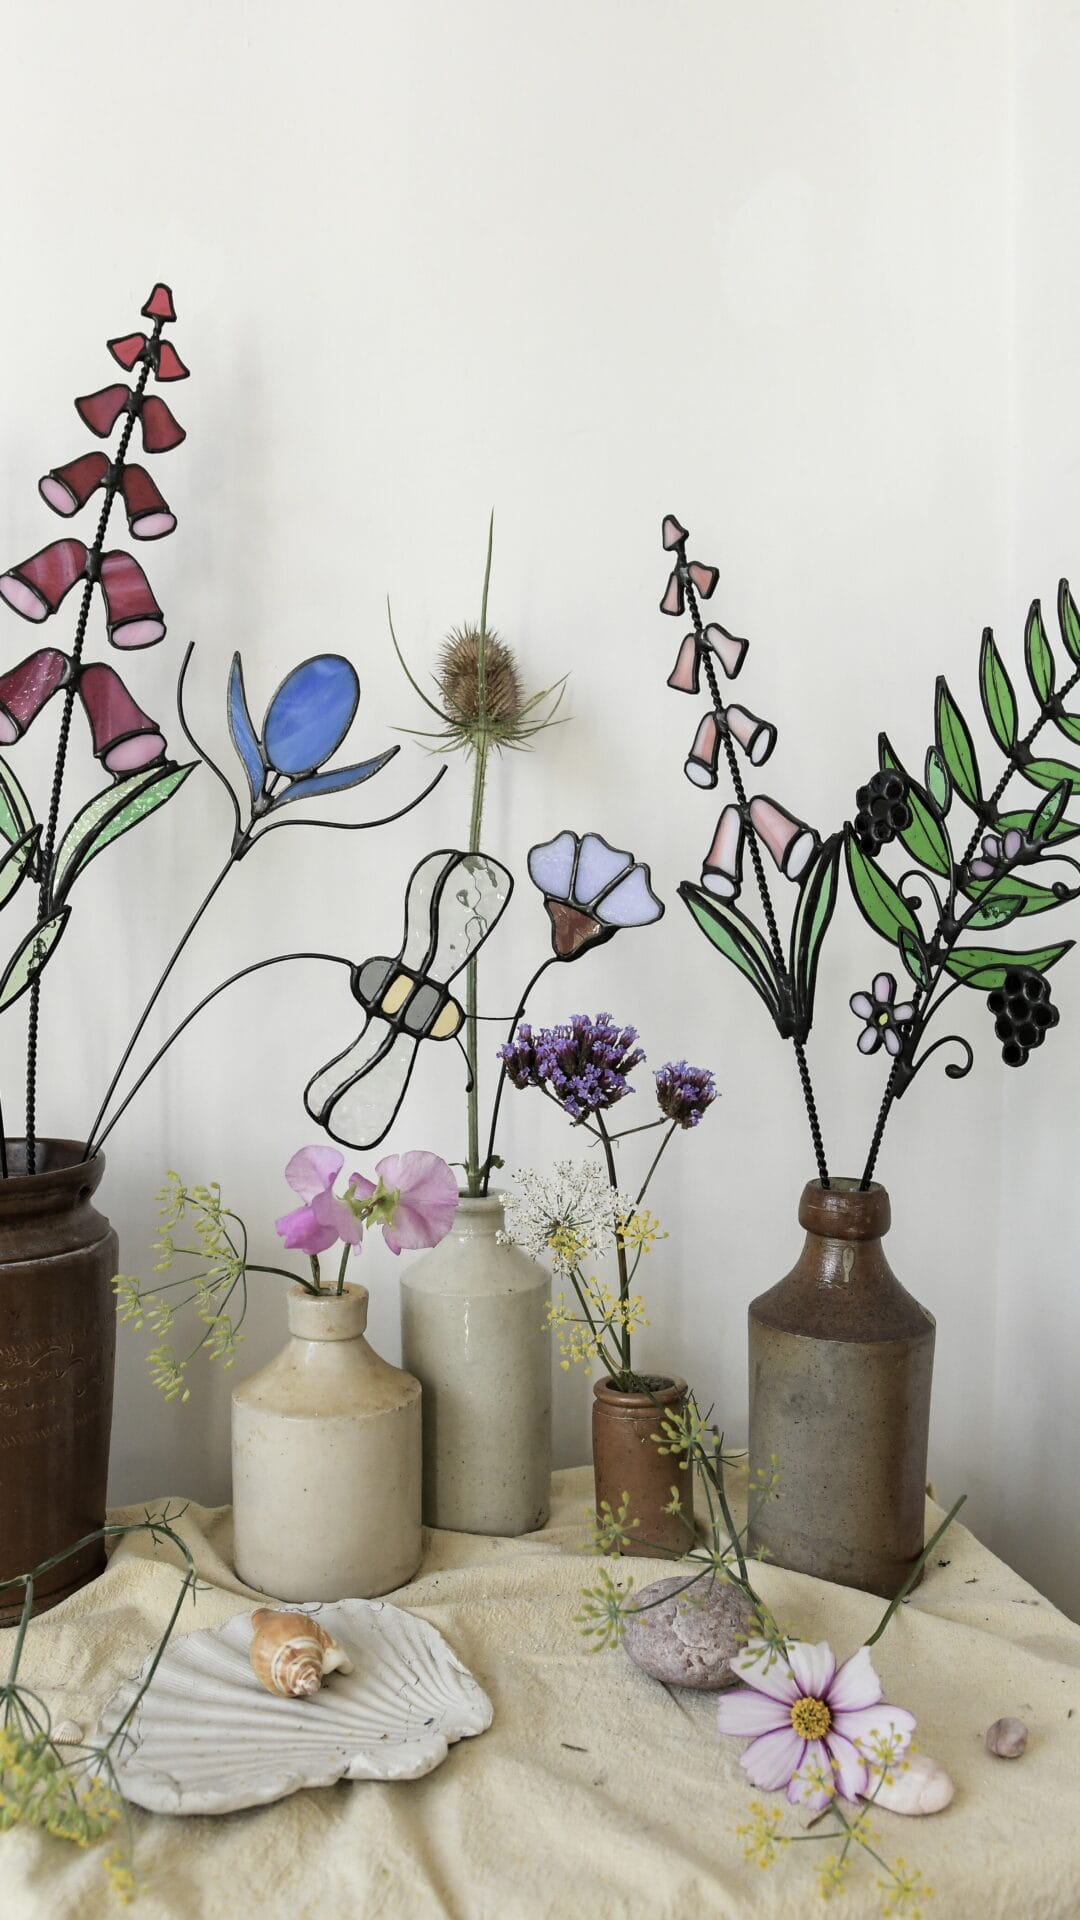 stained glass flowers and vines in ceramic vases alongside live specimens